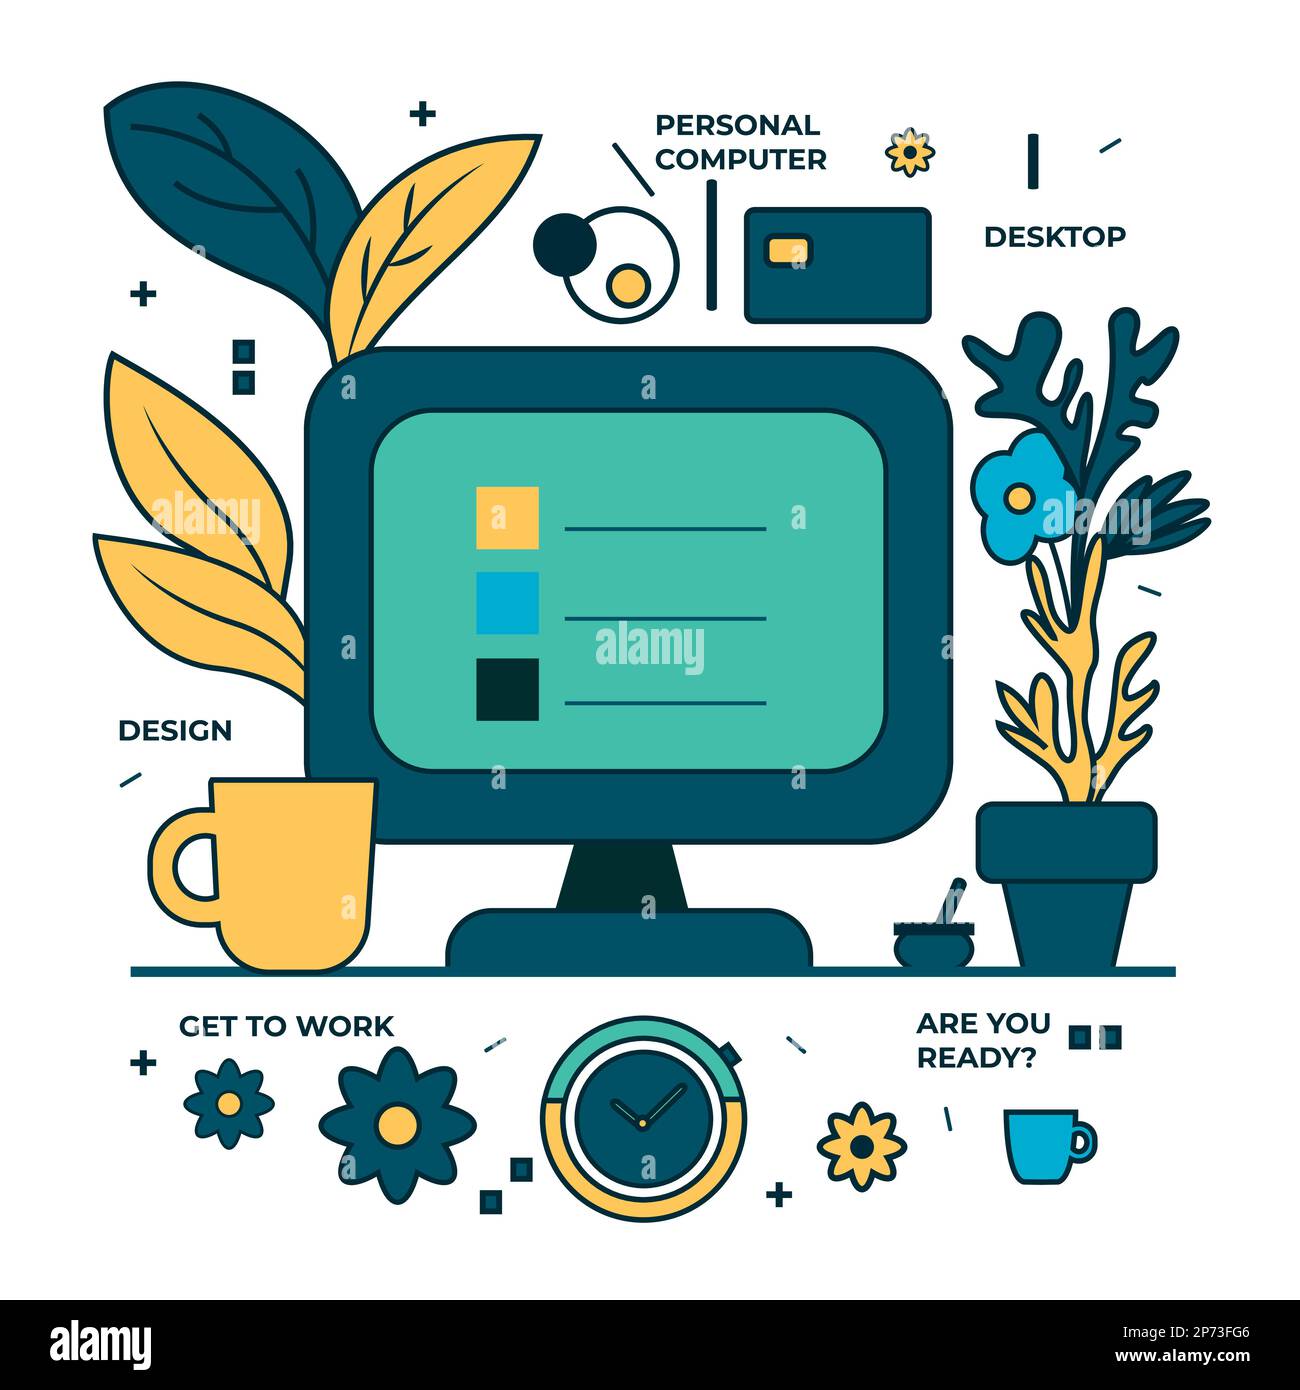 Set of retro flat icons related to work activities. Cool illustration of a laptop, clocks, plants, flowers and coffee for everyday life Stock Vector